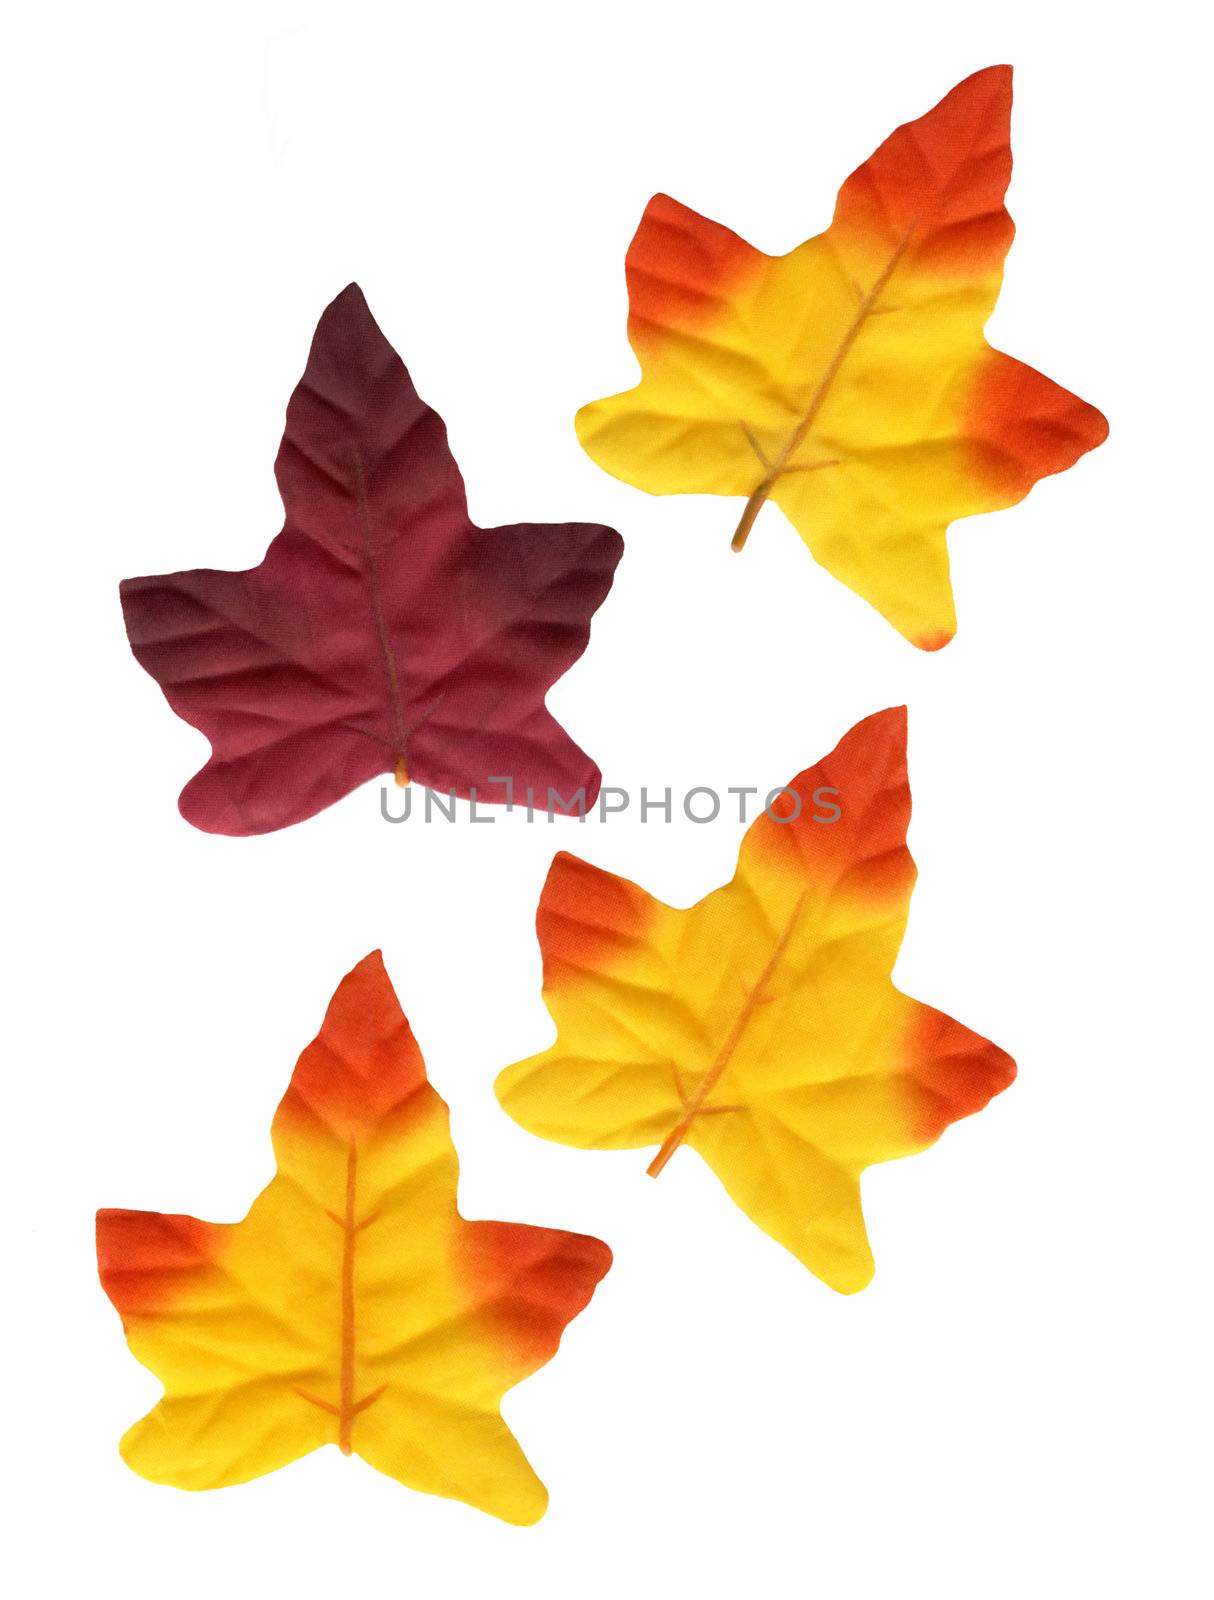 This image shows a macro from Decoration Leaves